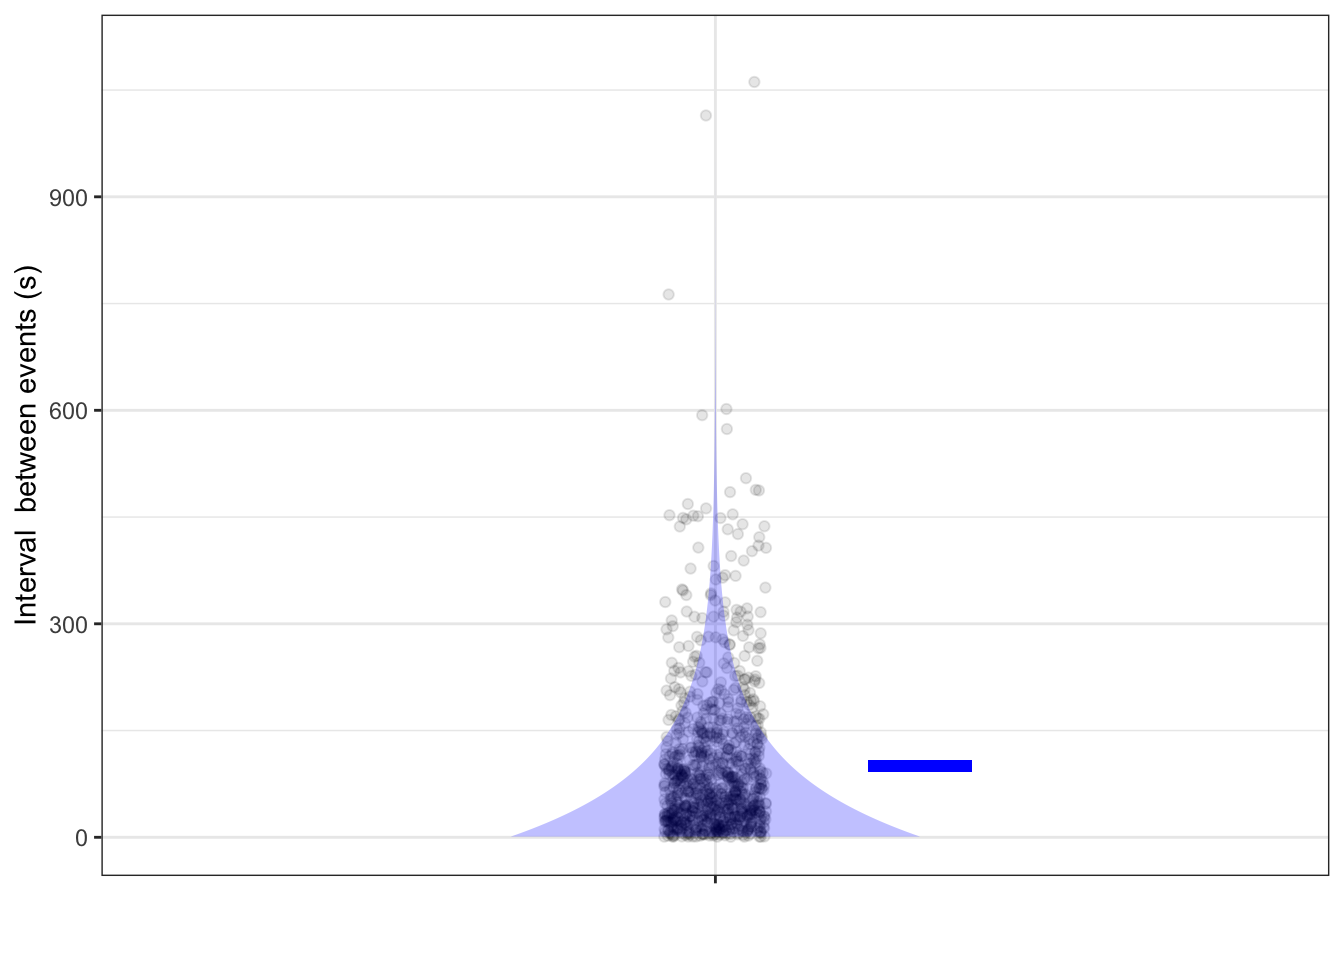 The times (in seconds) between successive meteorites. Both the individual intervals and a density violin are shown. The mean interval, shown as a blue bar, is the reciprical of the probability of the event at any given second.